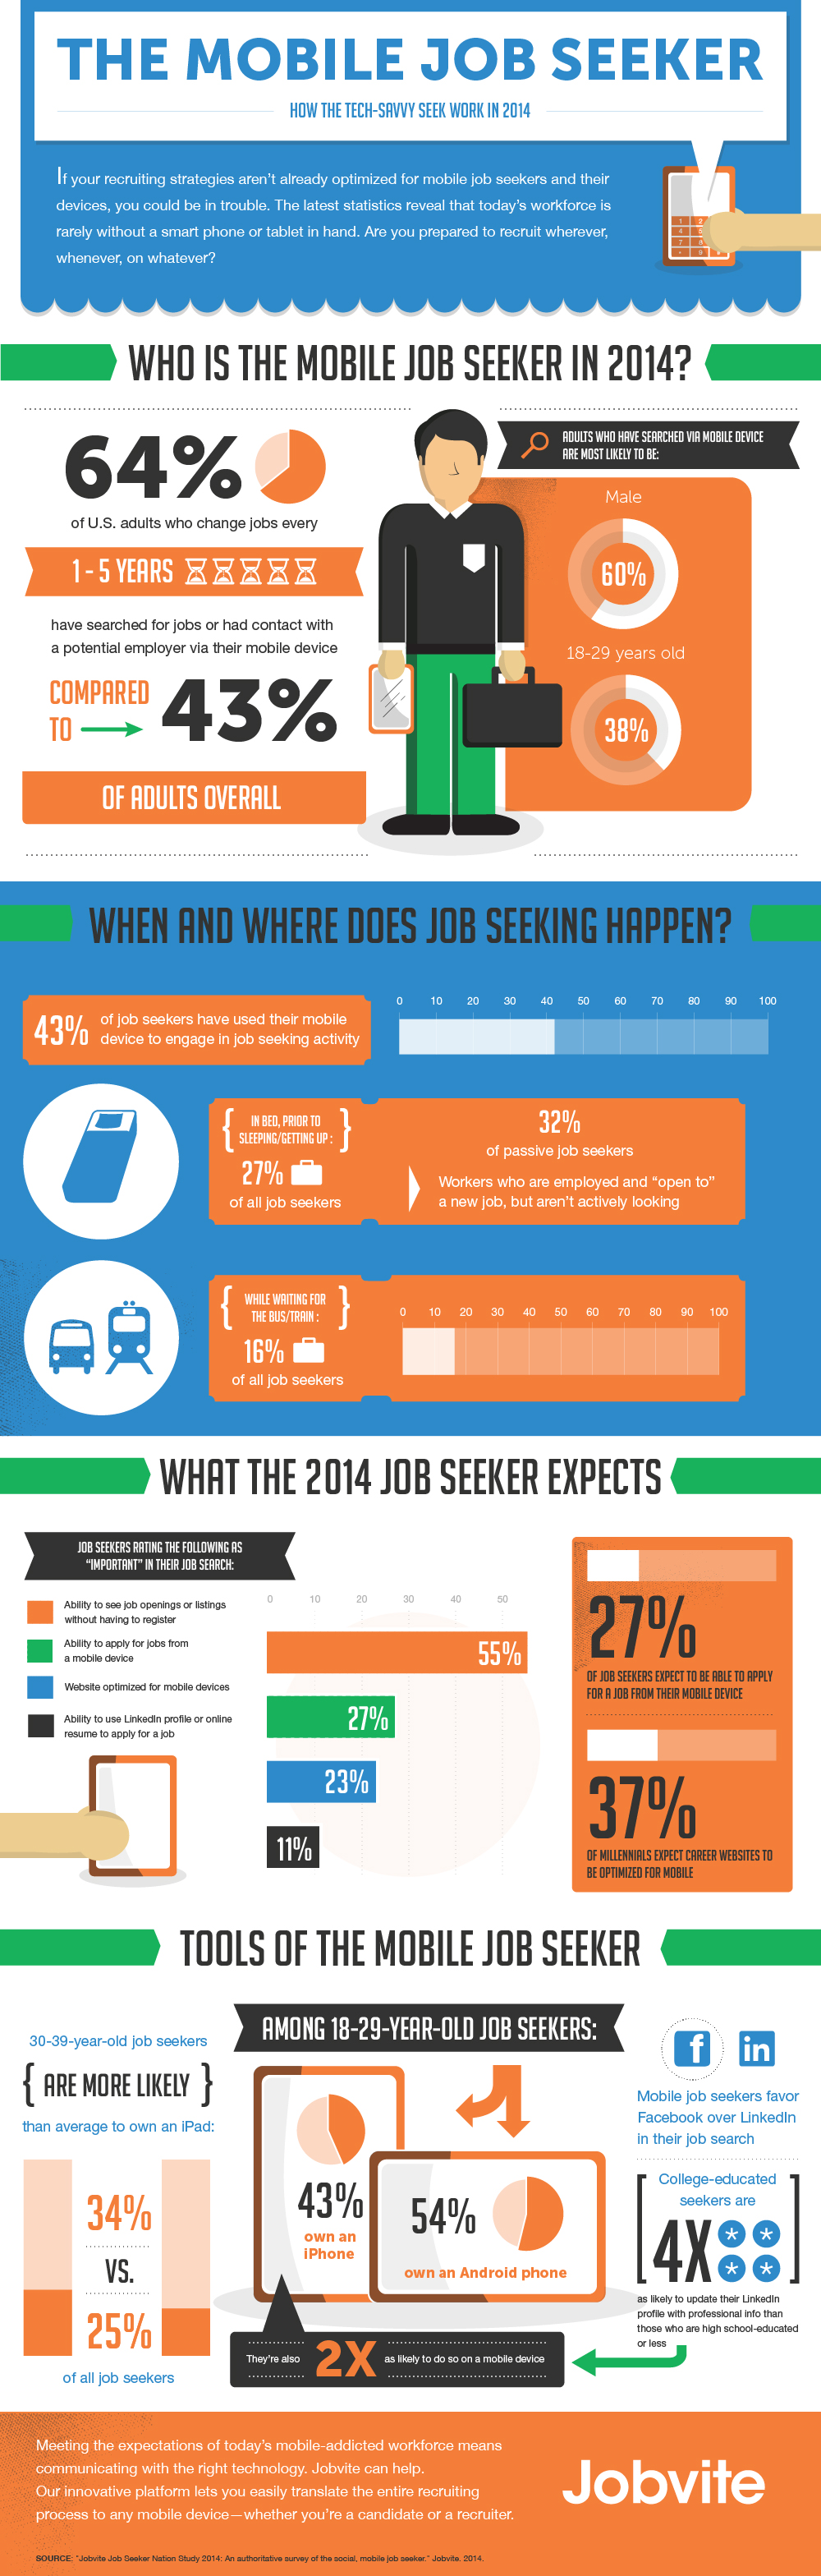 MobileJobs-seeker-infograph-zombieslounge